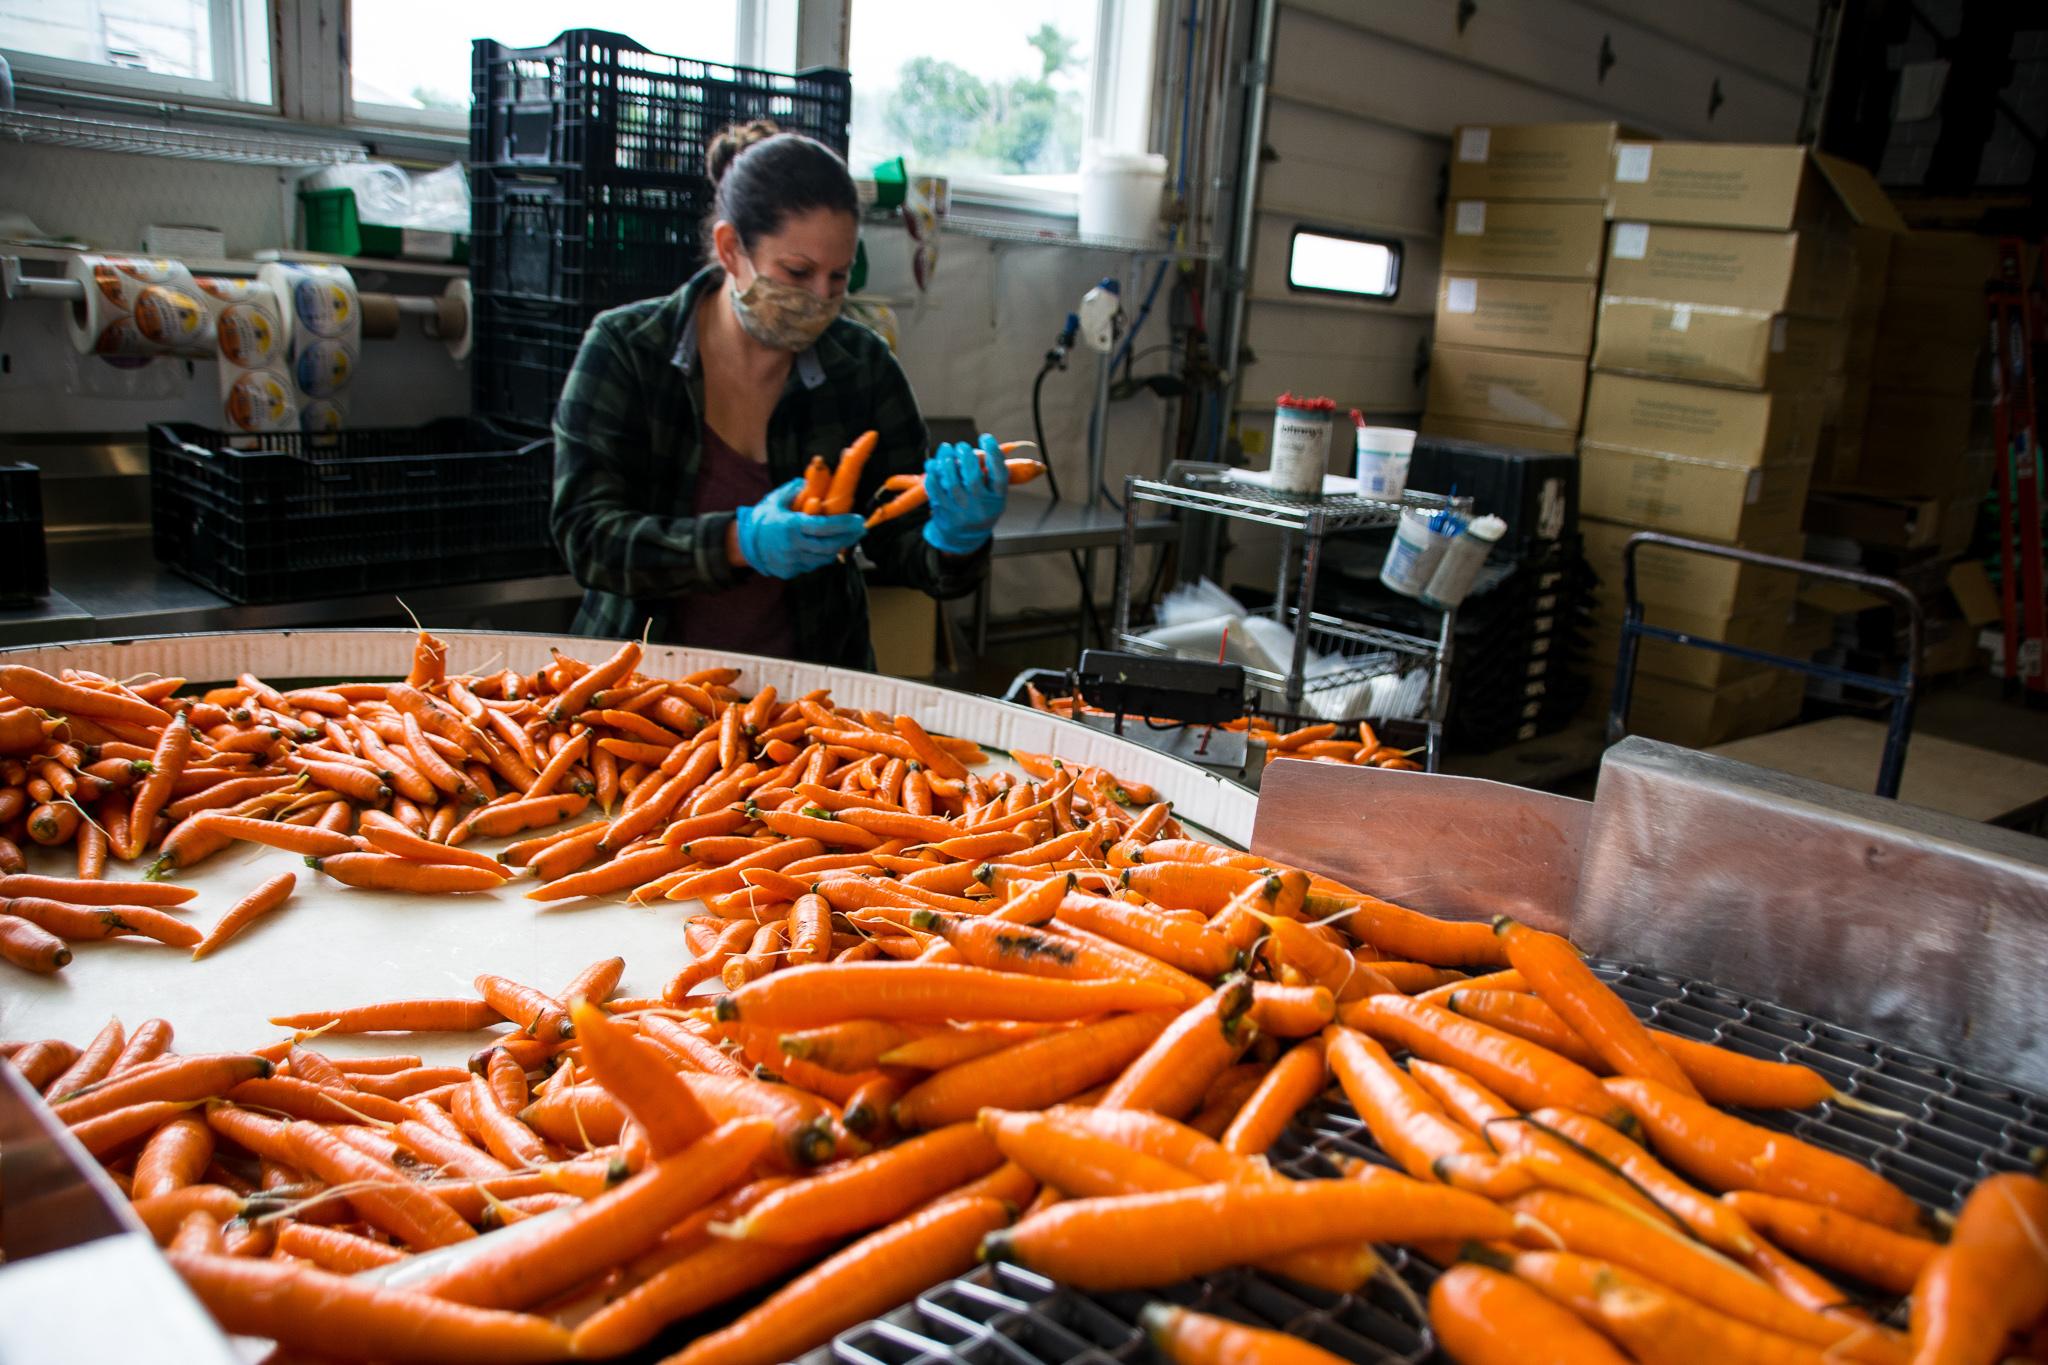 Carrots are running down a conveyor belt onto a large table. In the background, a woman wearing a mask is handling some of the carrots.